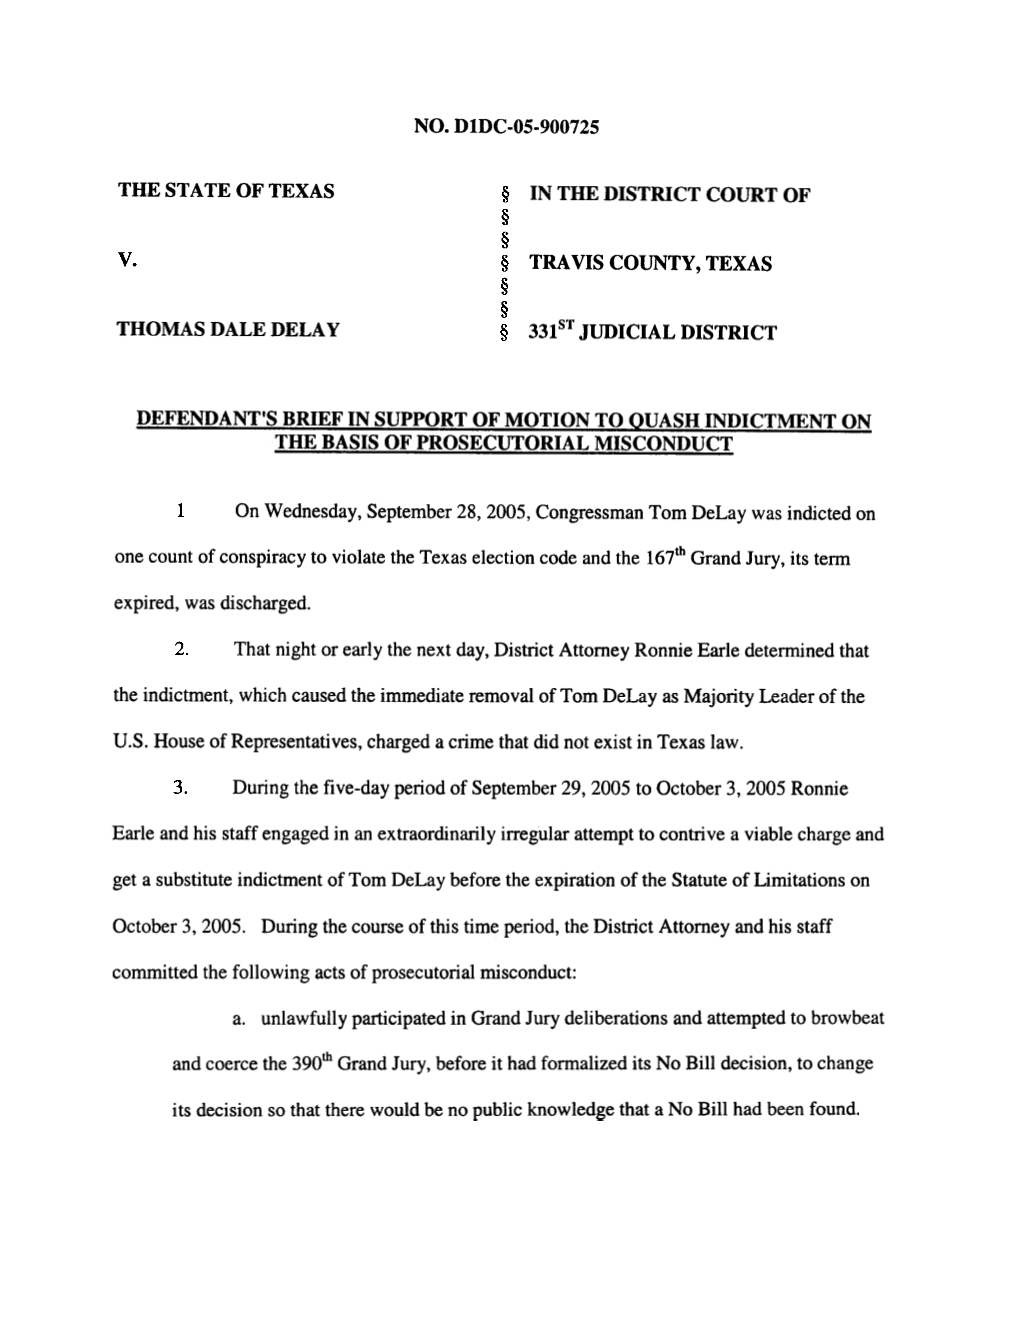 To View the Brief in Support of Motion to Quash Indictment (Pdf)